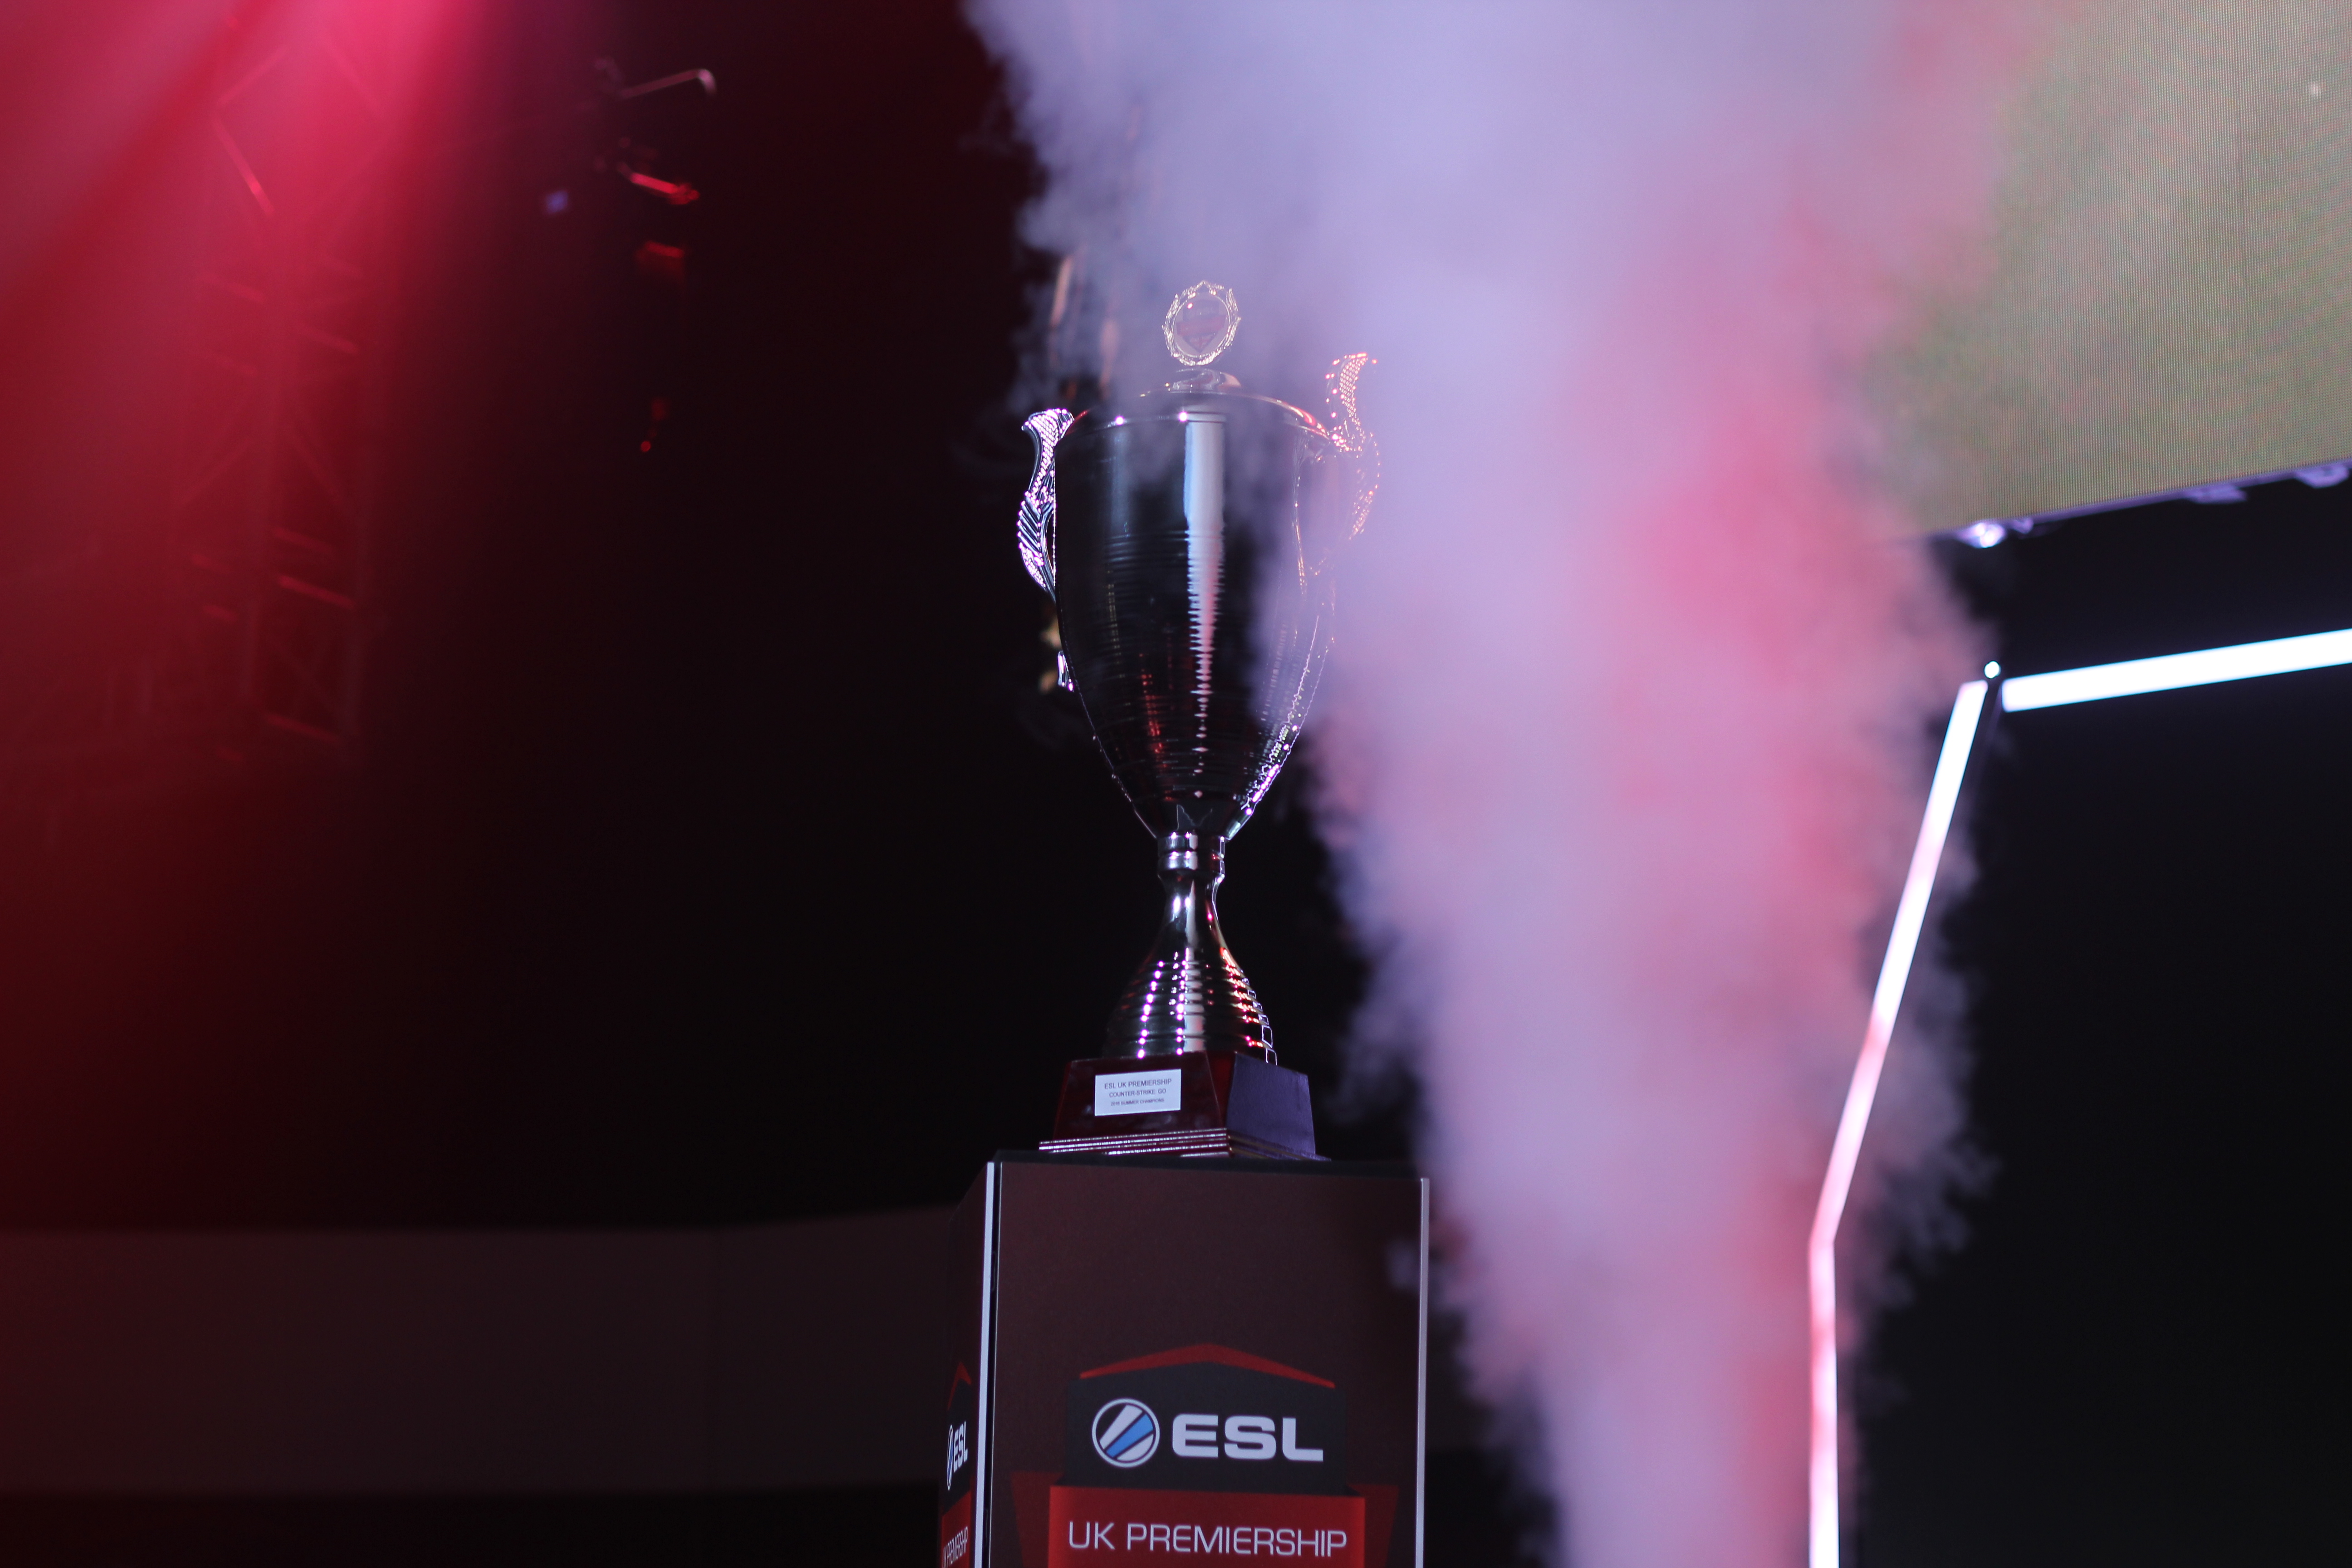 The ESL UK EPS trophy headed home with KalKal, the owner of MnM Gaming